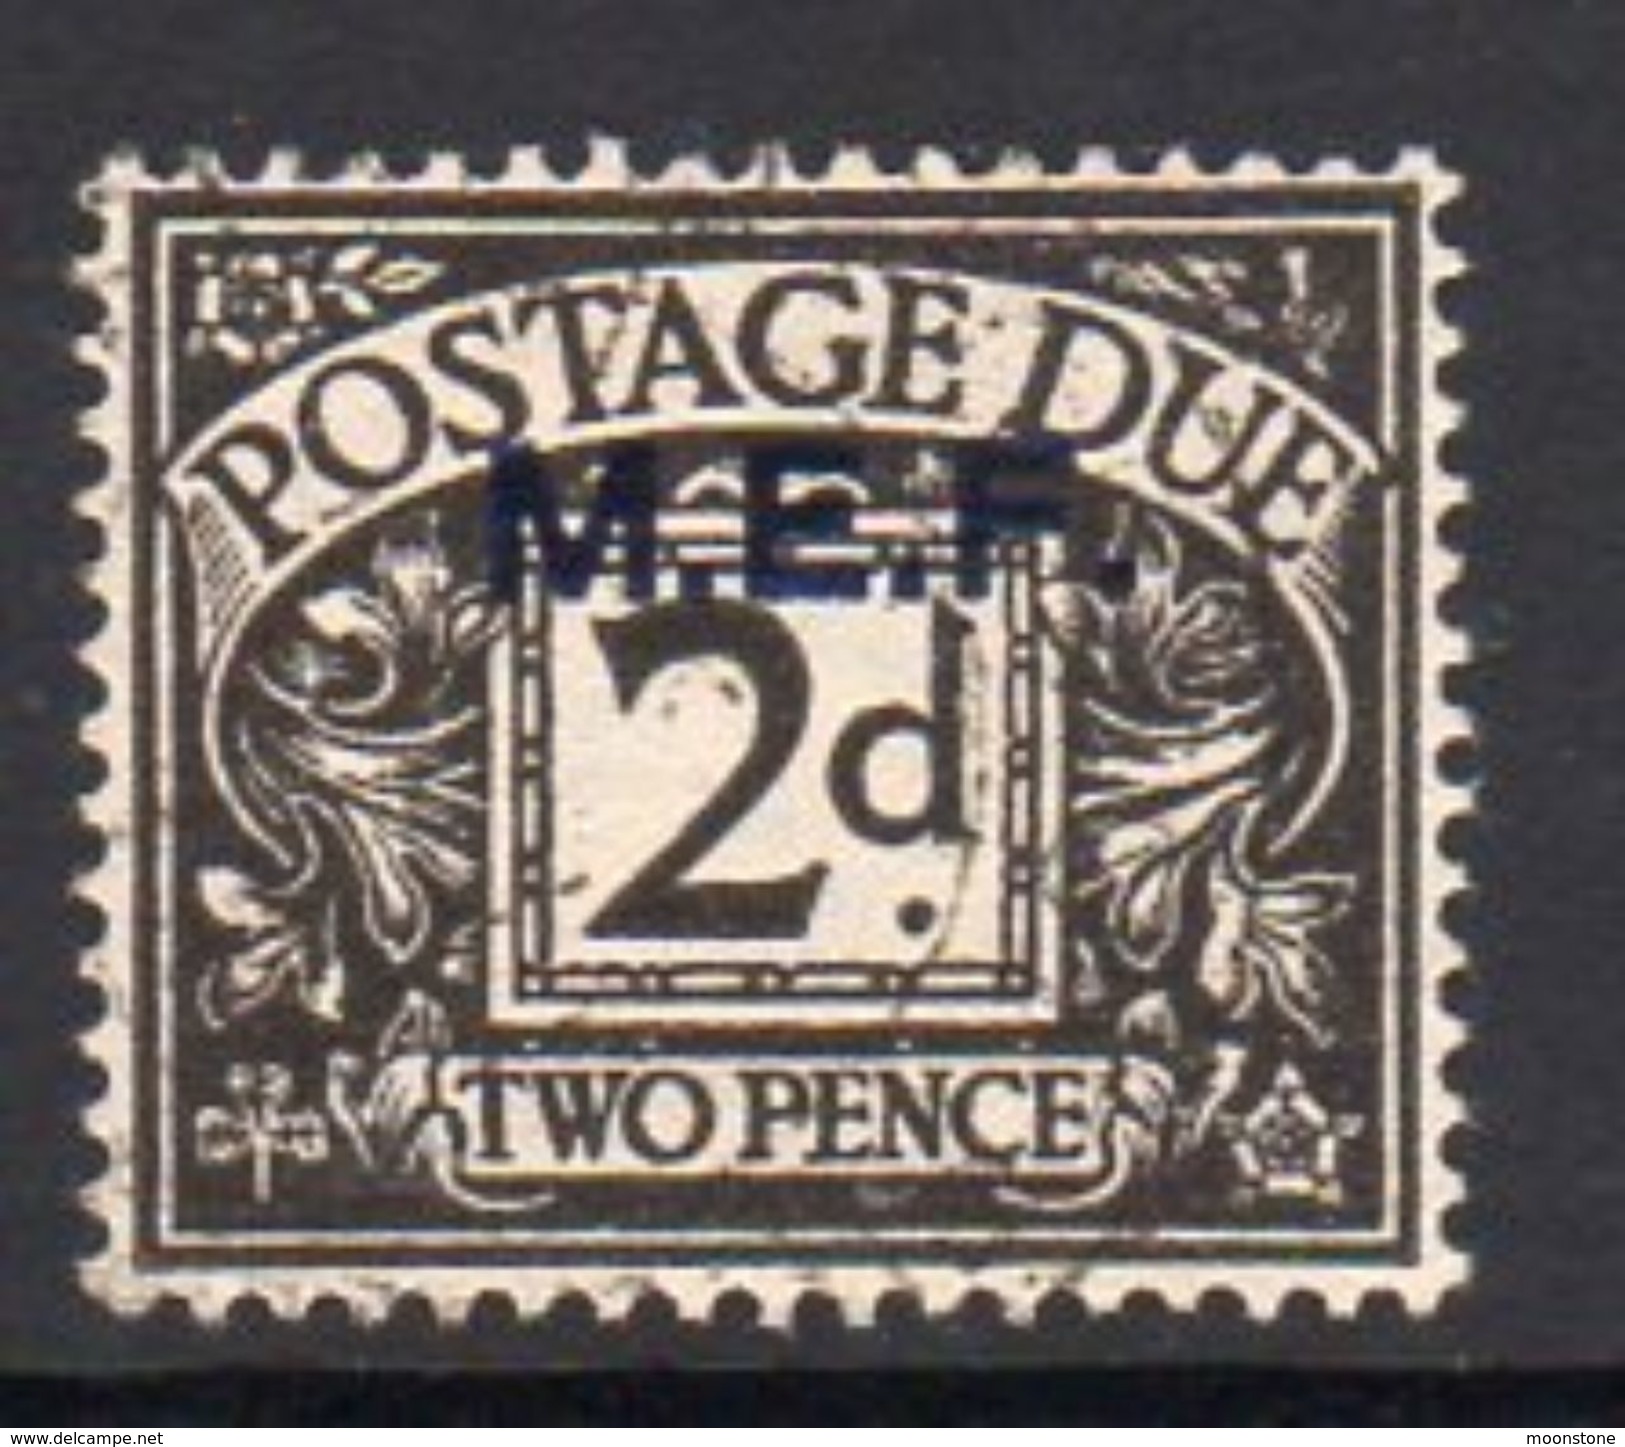 BOIC, Middle East Forces 1942 2d Postage Due Overprint On GB, Used, SG MD3 (A) - Occ. Britanique MEF